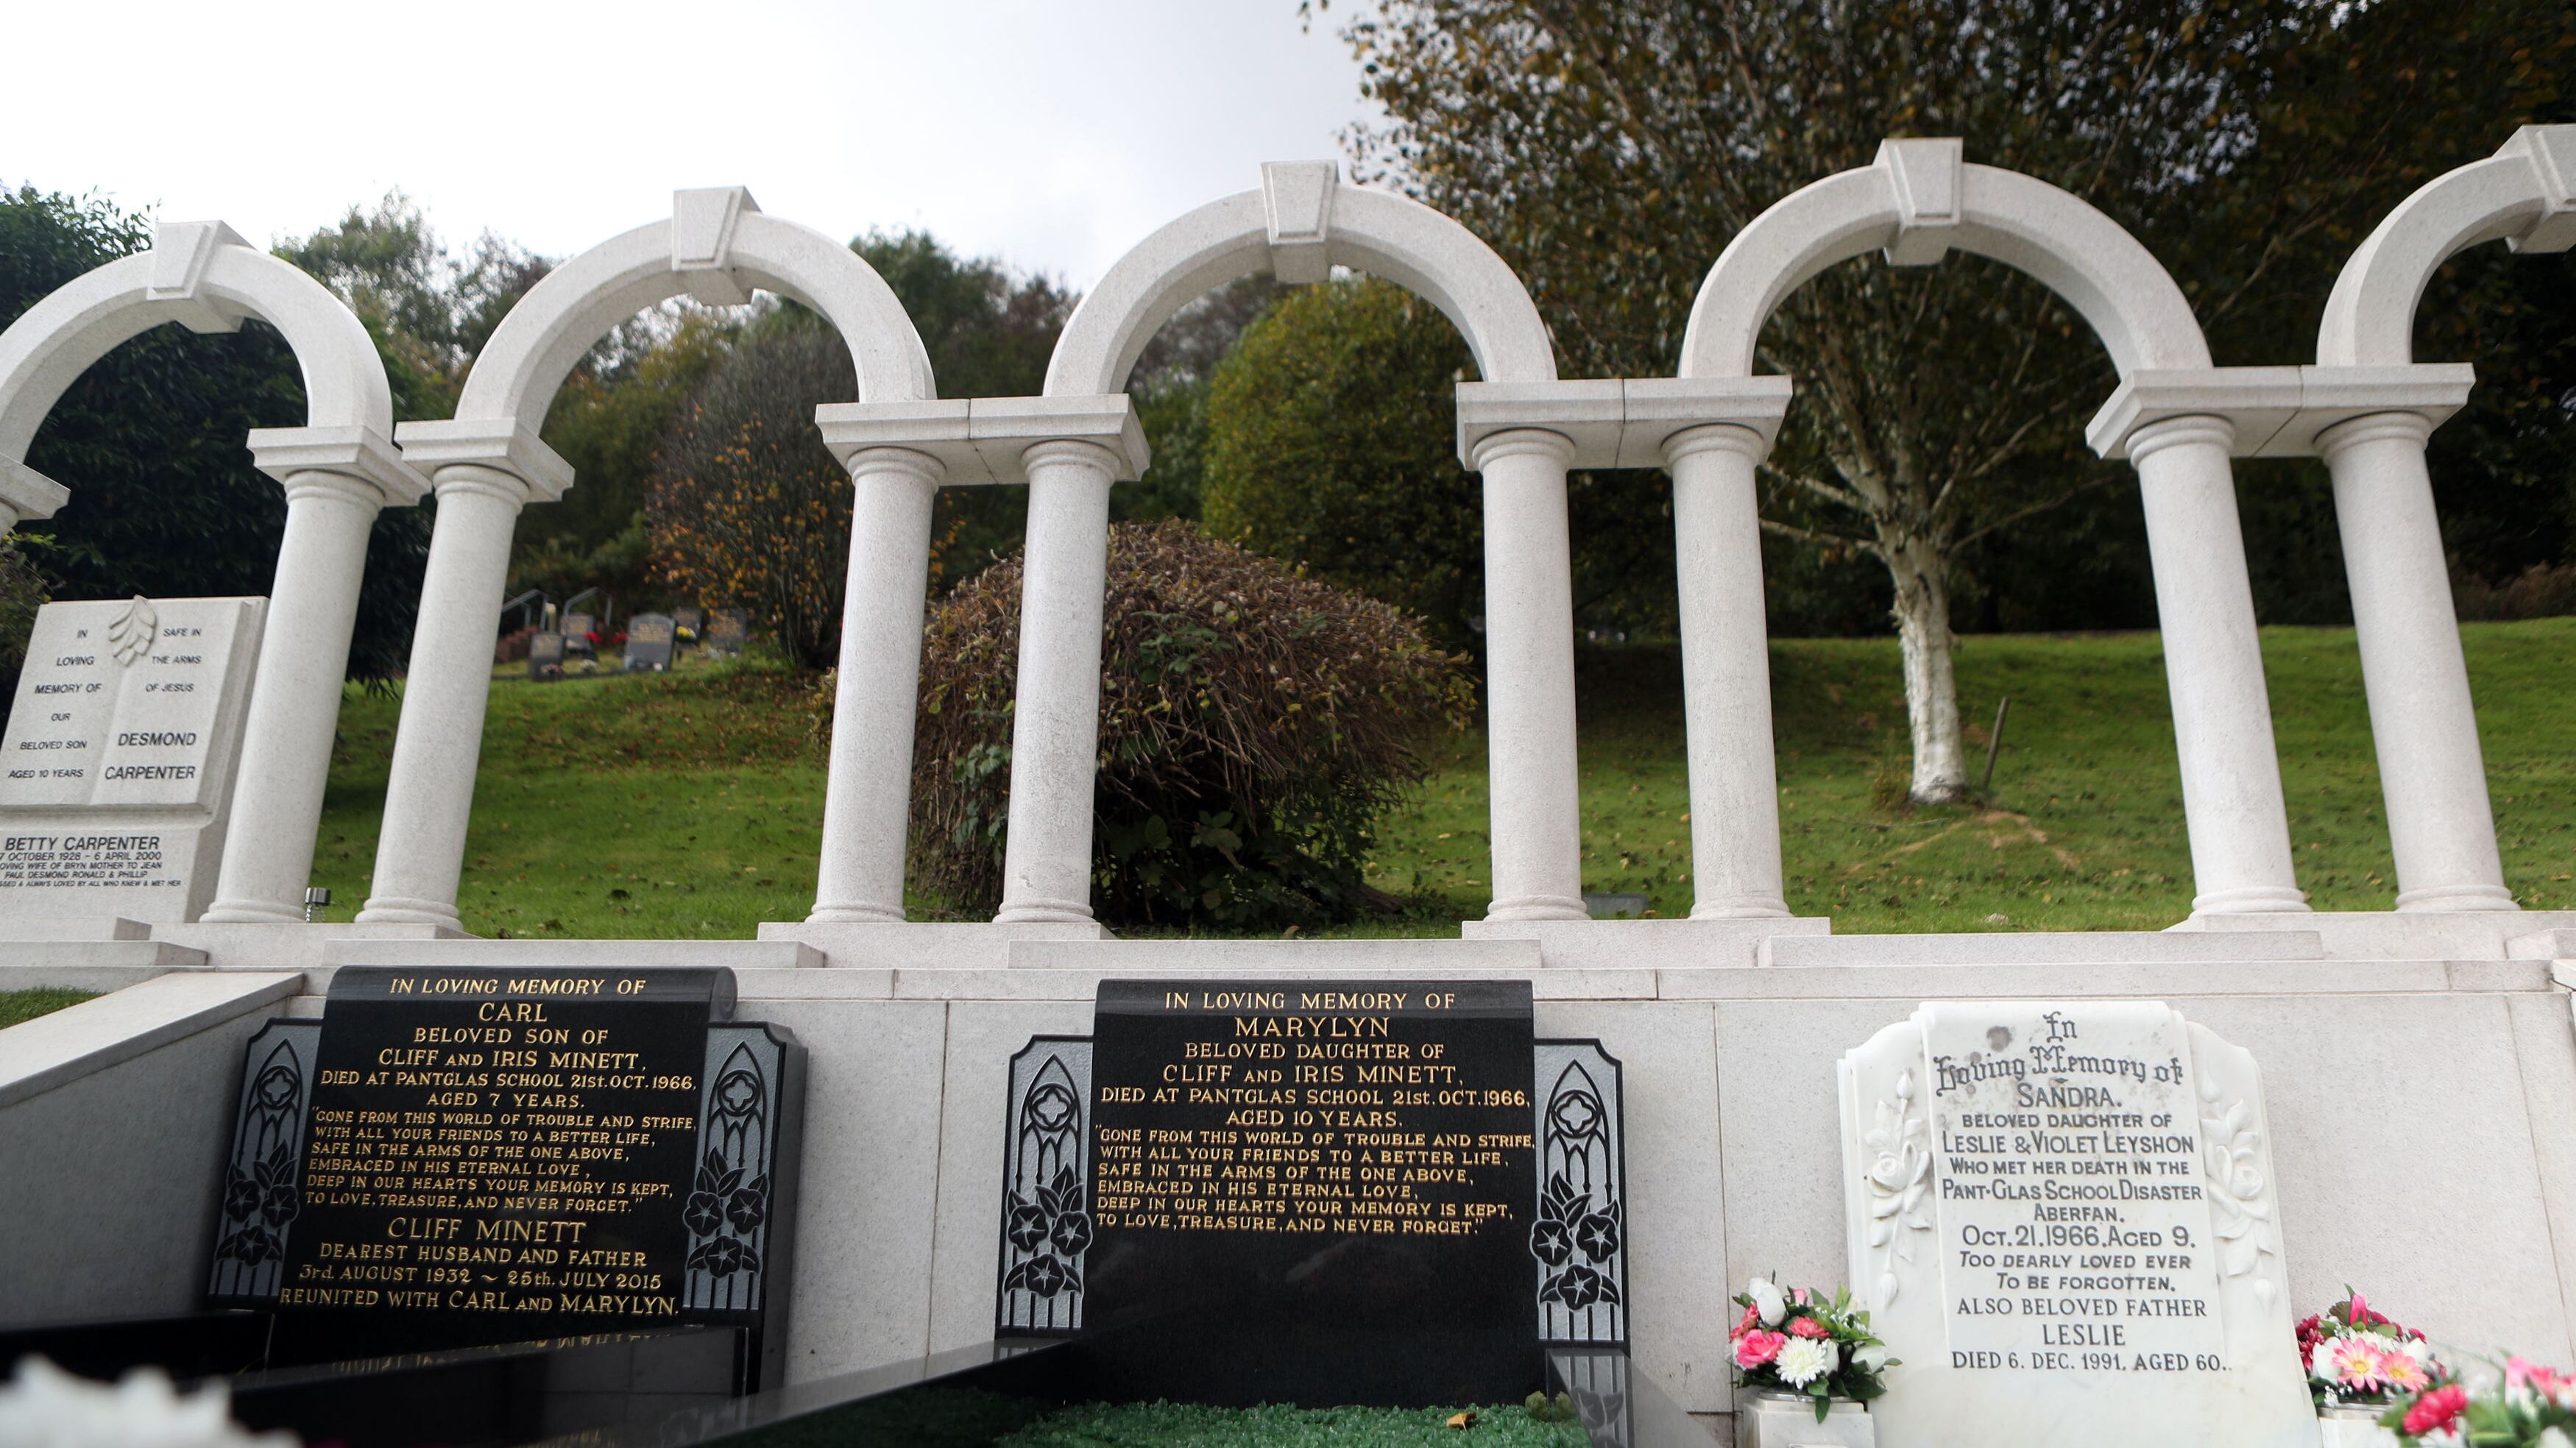 The graves of the victims of the Aberfan disaster in the village’s cemetery in Wales